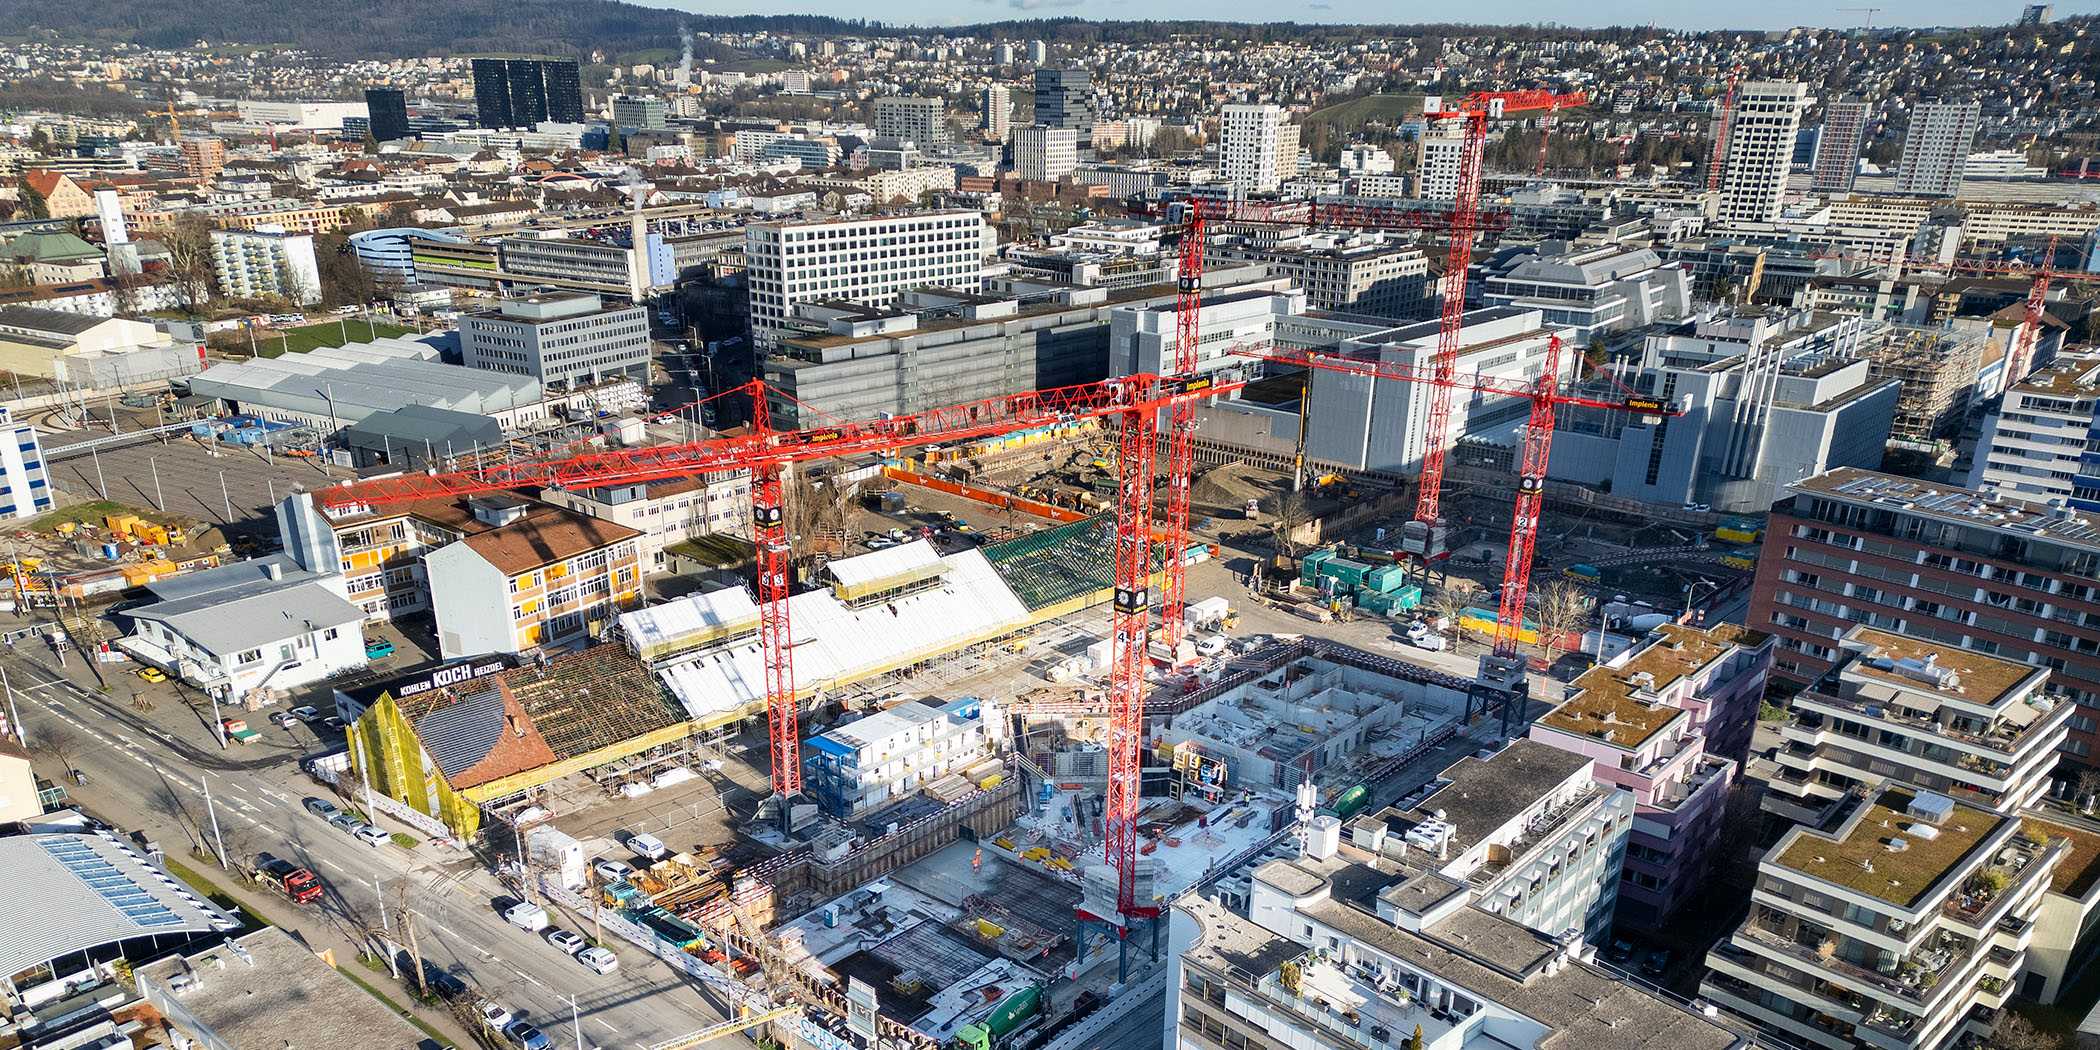 Koch site in Zurich-Altstetten from the air, showing construction site with cranes.